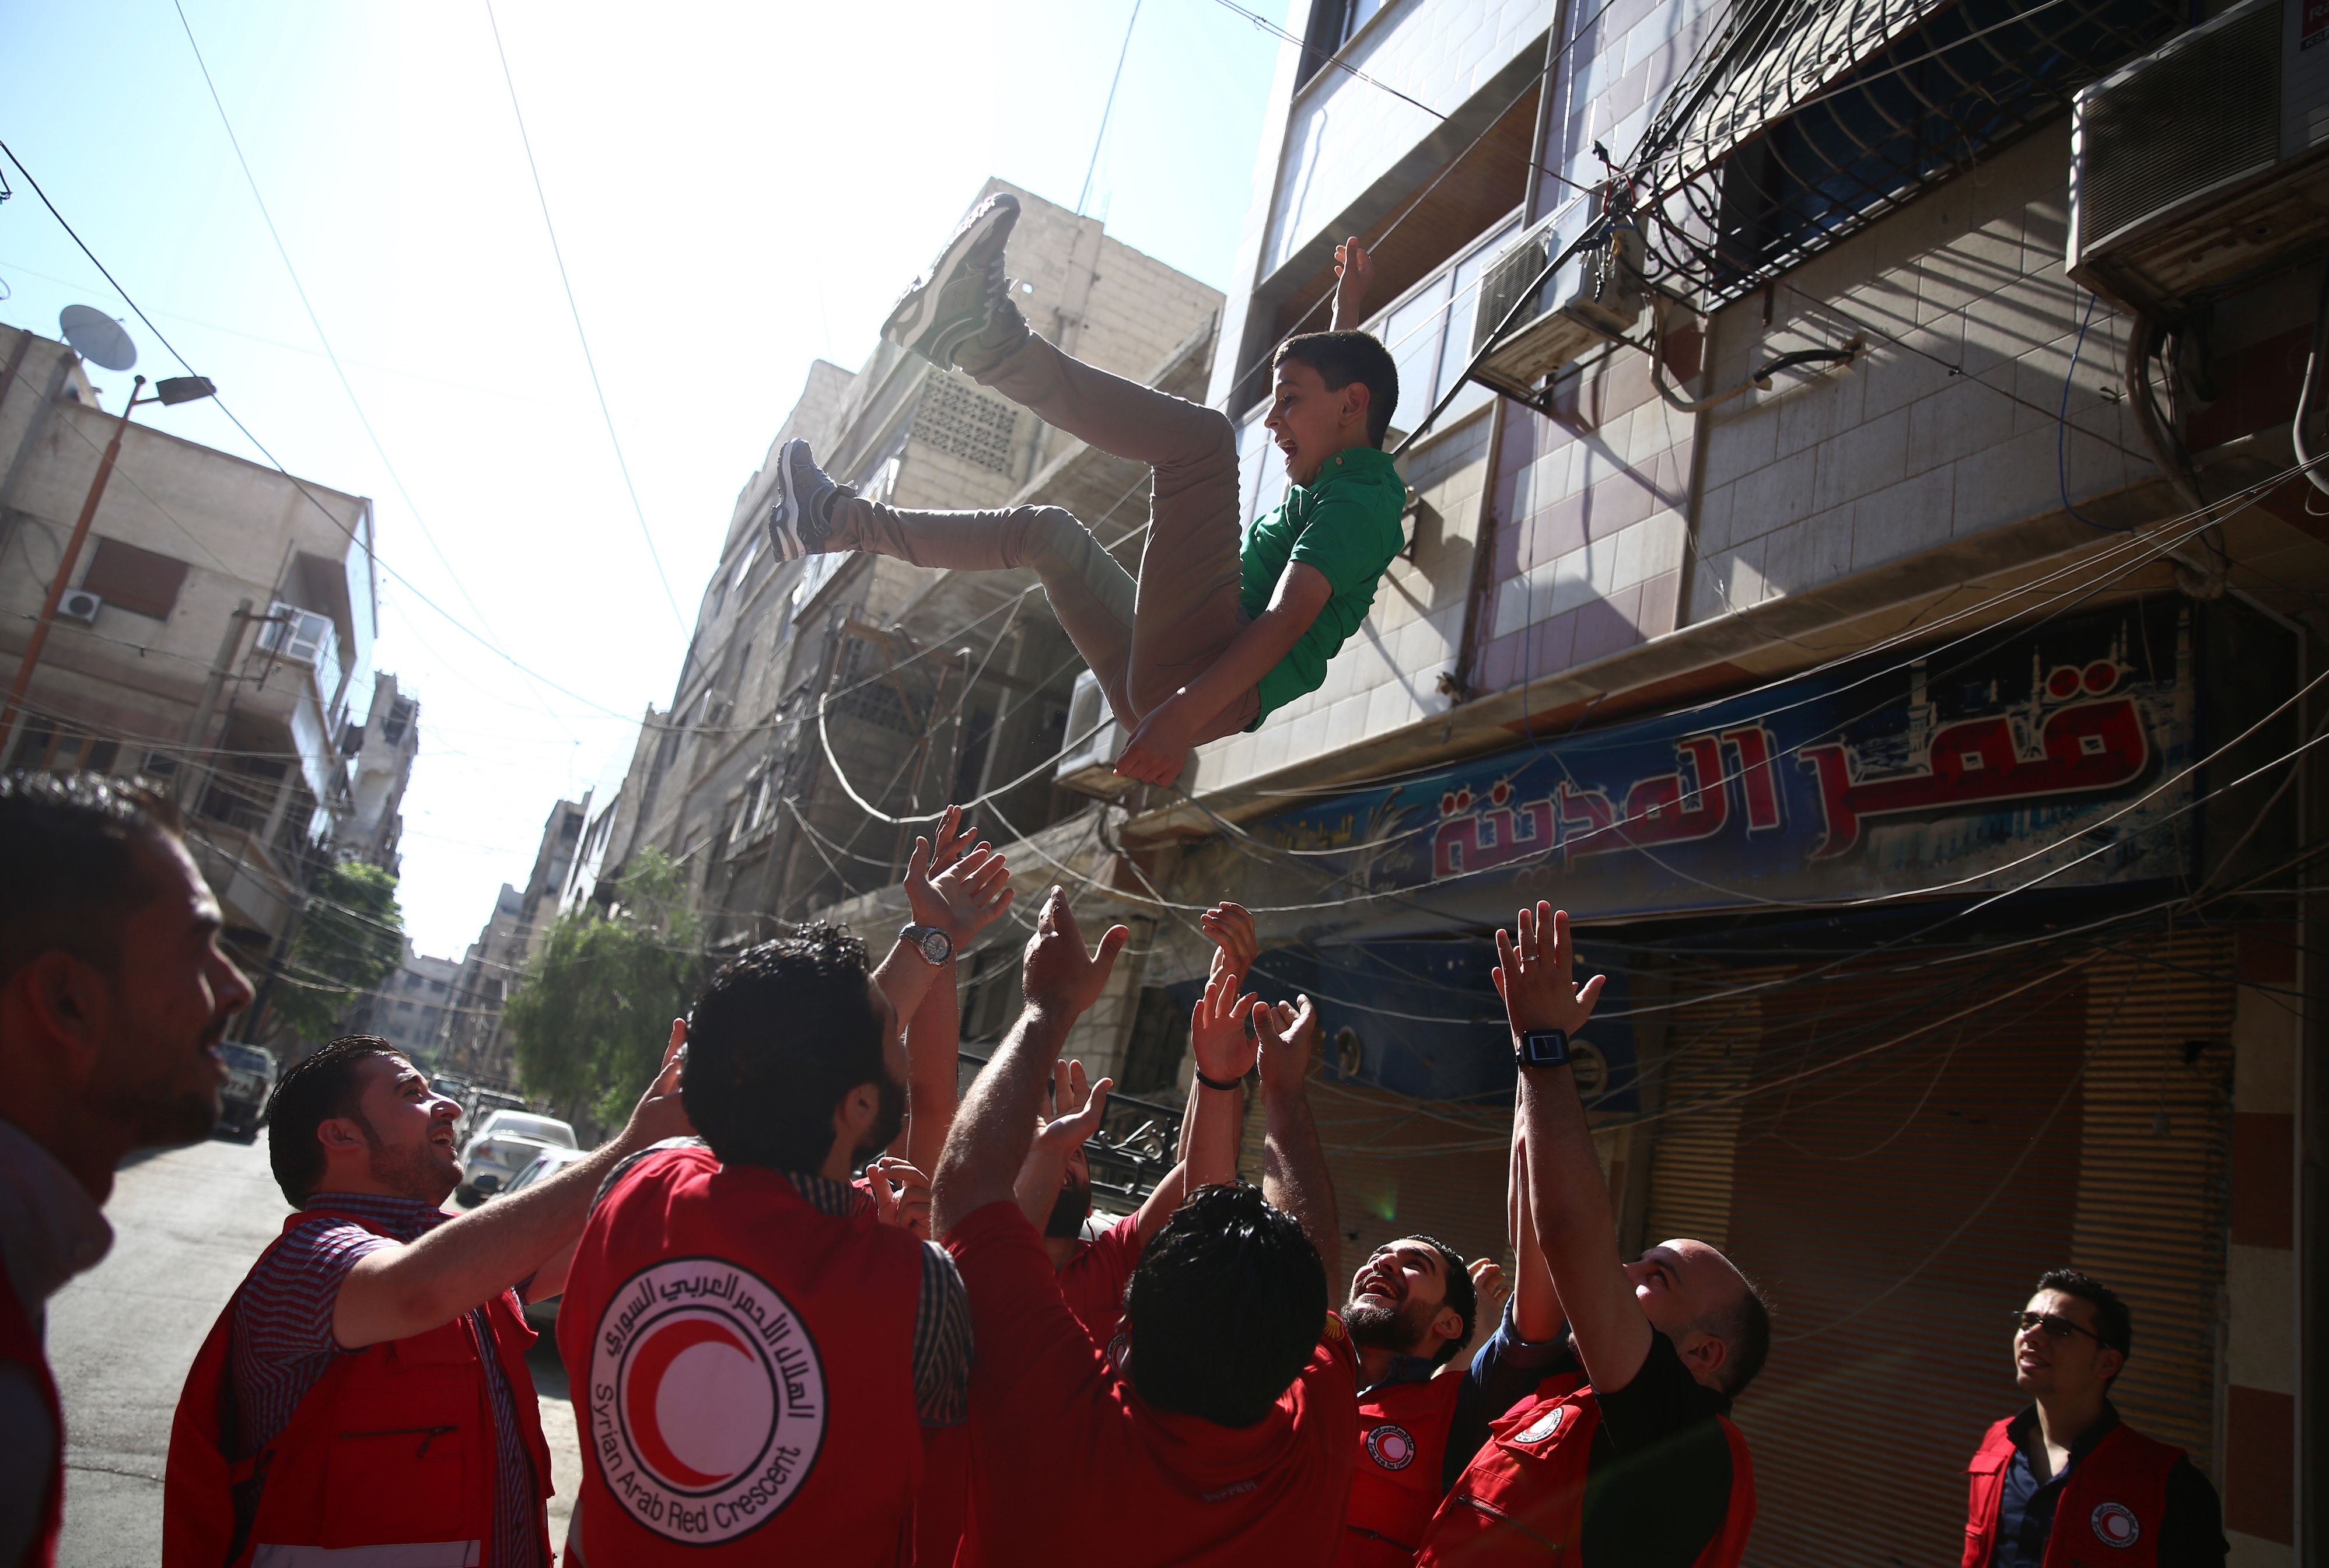 2016-07-06 08:34:49 Members of the Syrian Arab Red Crescent (SARC) throw a young boy under a psychological support program in the air in the rebel-held town of Douma, east of the capital Damascus, as they celebrate the first day of Eid al-Fitr, which marks the end of the Muslim fasting month of Ramadan on July 6, 2016. / AFP PHOTO / Abd Doumany